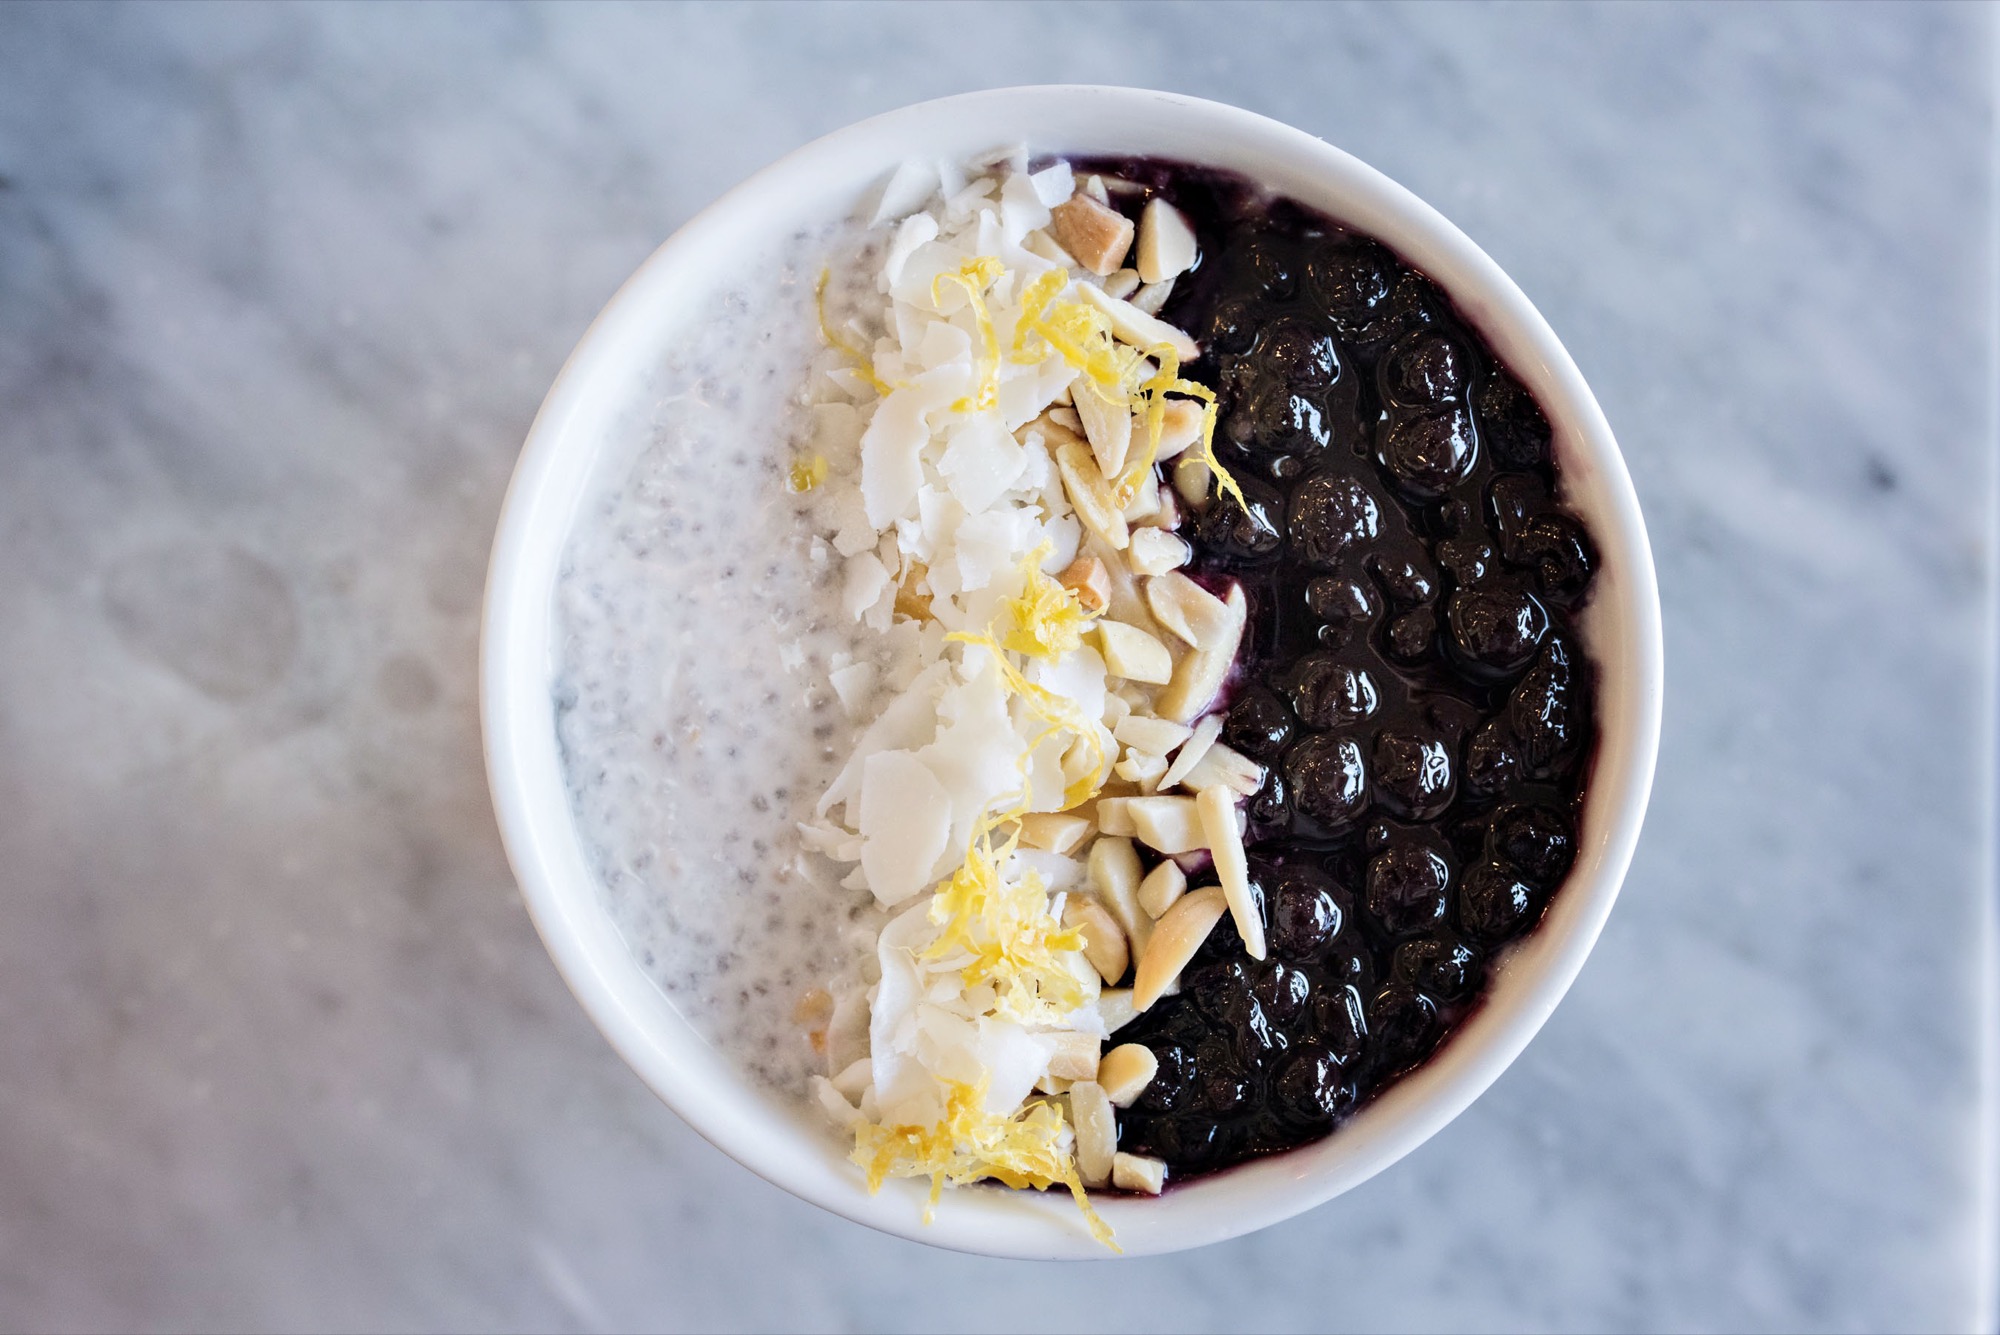 Coconut Chia Seed Pudding with coconut flakes, crushed almonds, and blueberry-lemon compote / Photo by D'Ann McCormick Boal